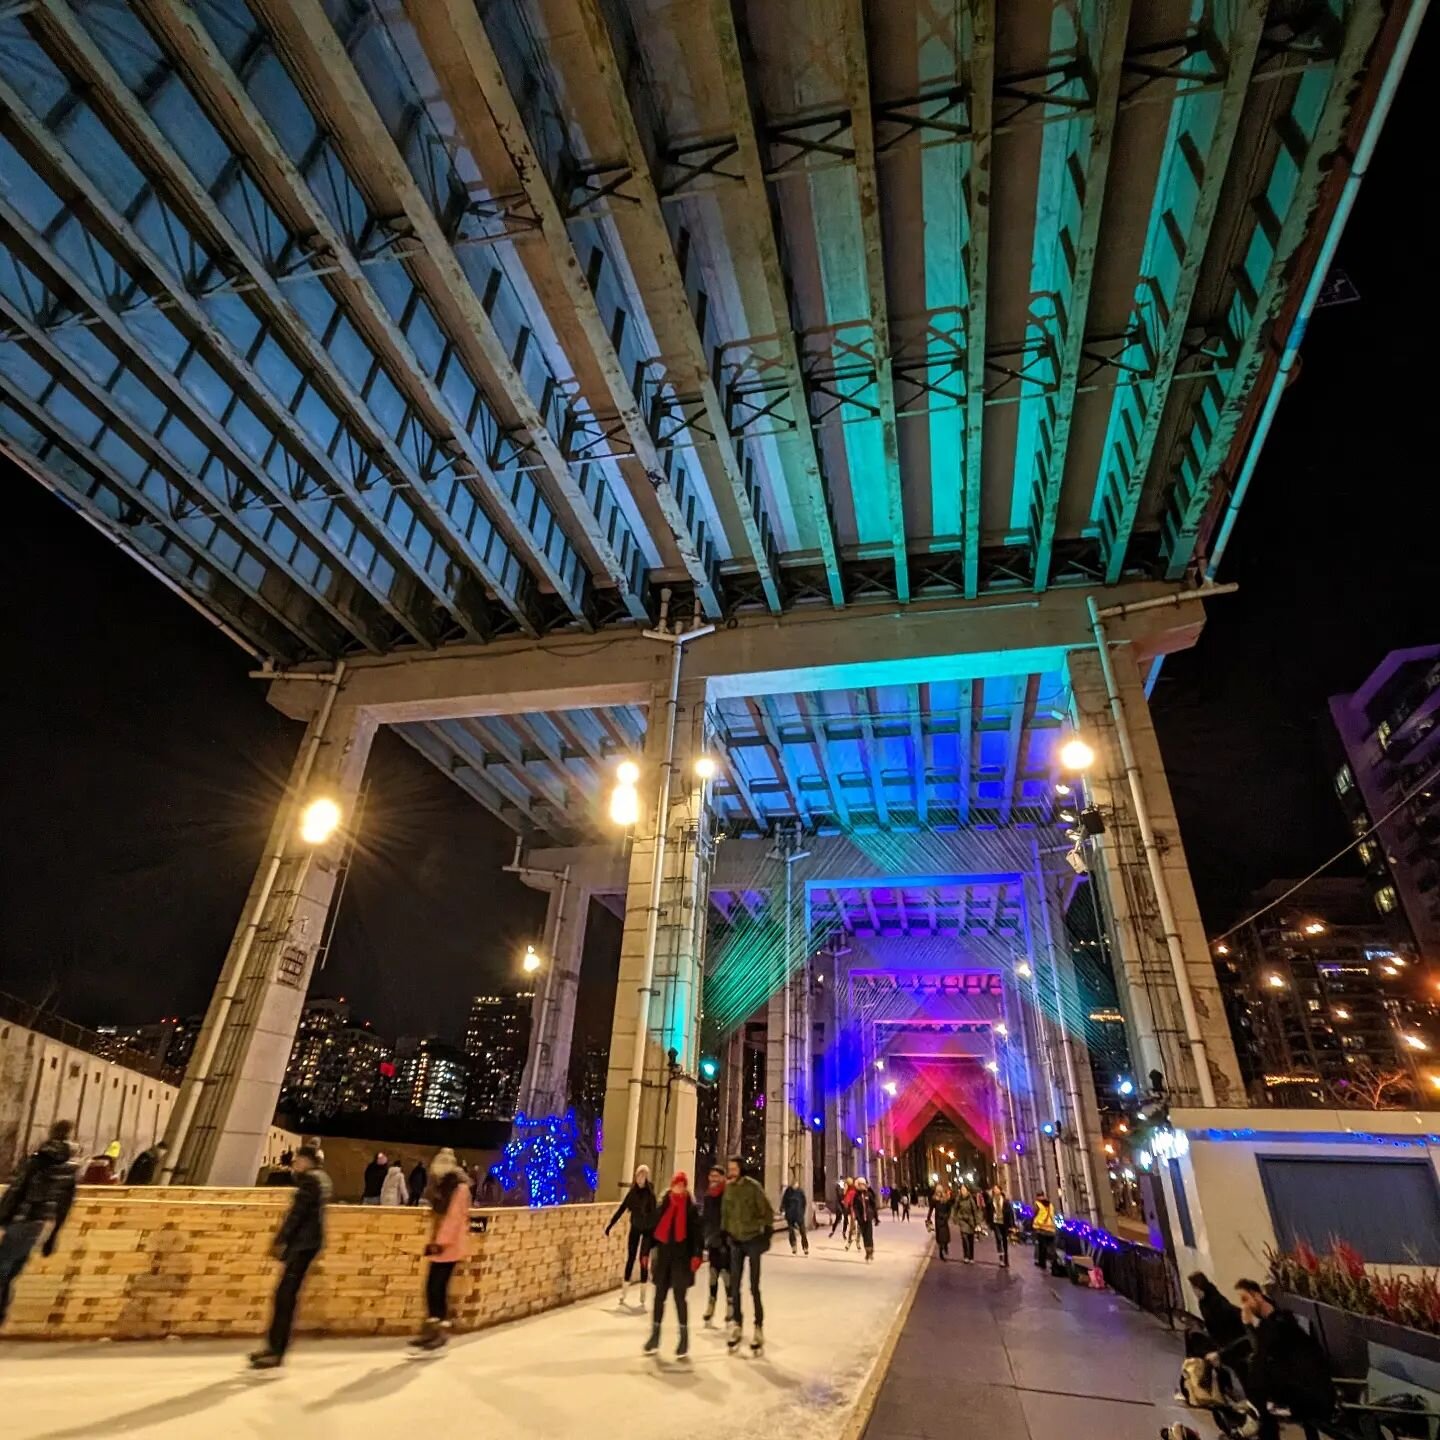 Back in Toronto, enjoying downtown night life. Today was my first time skating under the Bentway, lit up by beautiful colours of the &quot;Northern Lights&quot;. The free hot chocolate was a lovely bonus ☕

Skate rentals available.

Thanks Natalija a